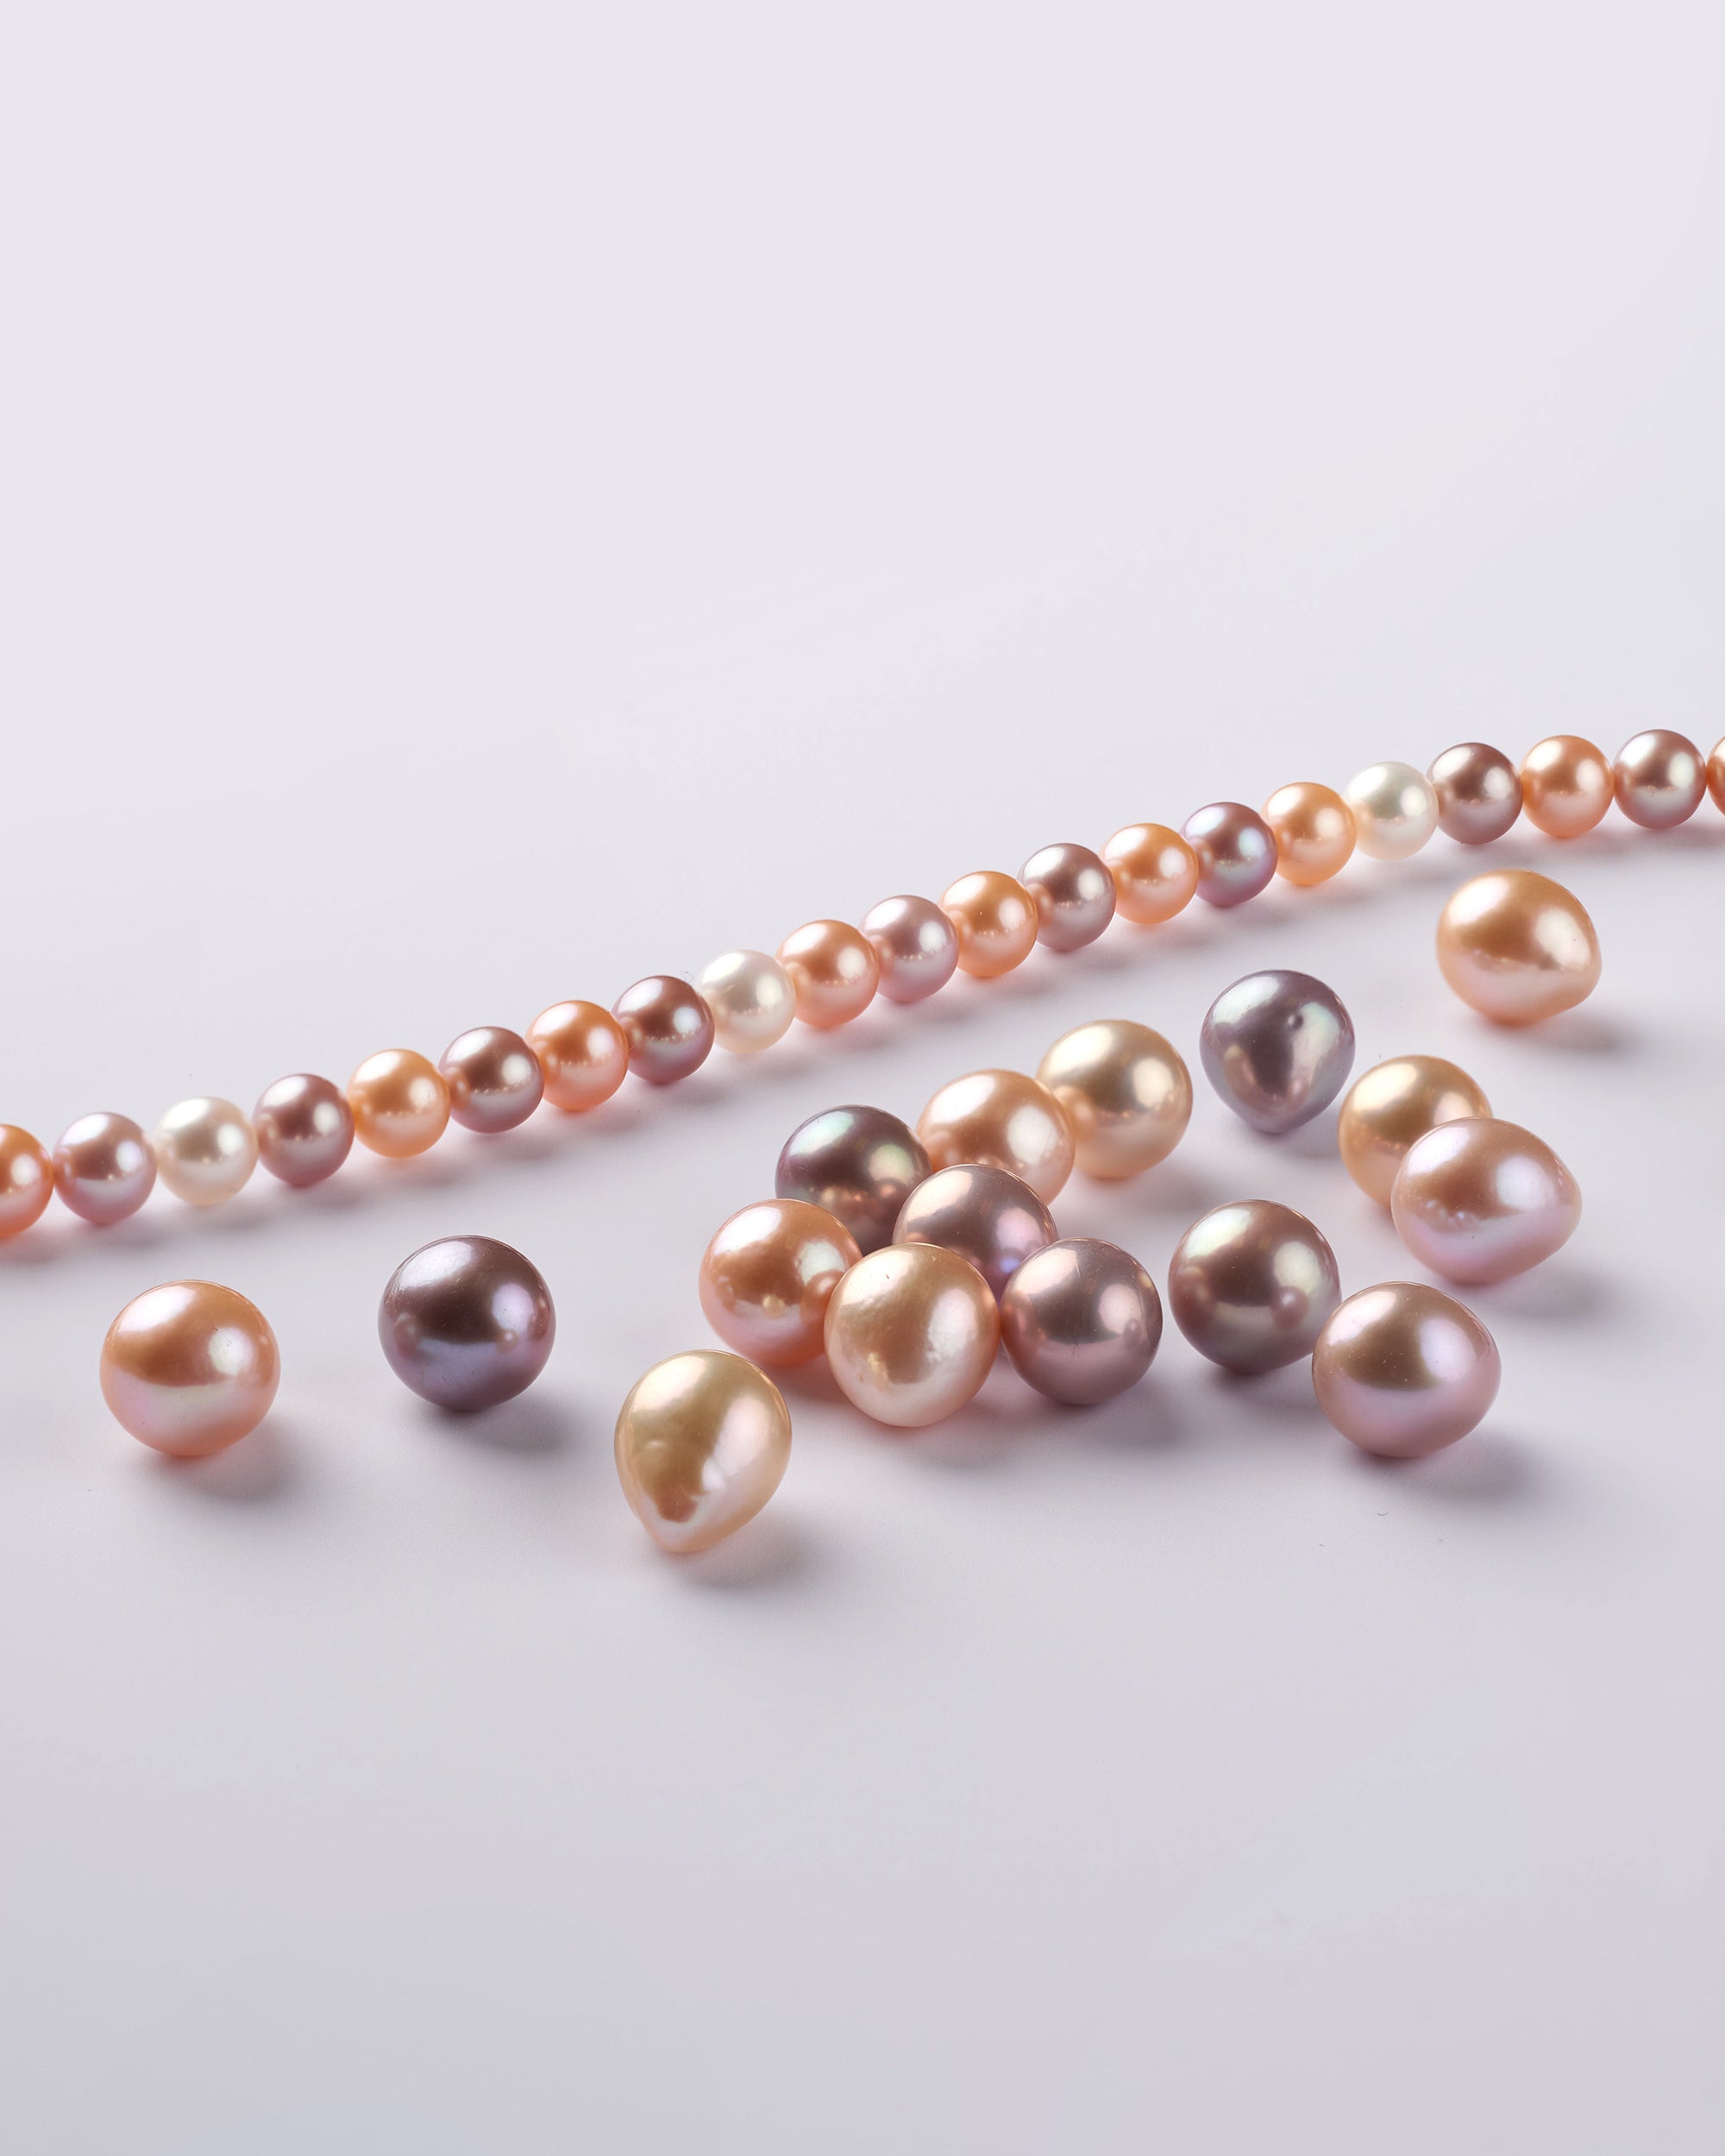 4mm Pearl Bracelet Single Strand with Gold Accents | MelJoy Creations  Jewelry